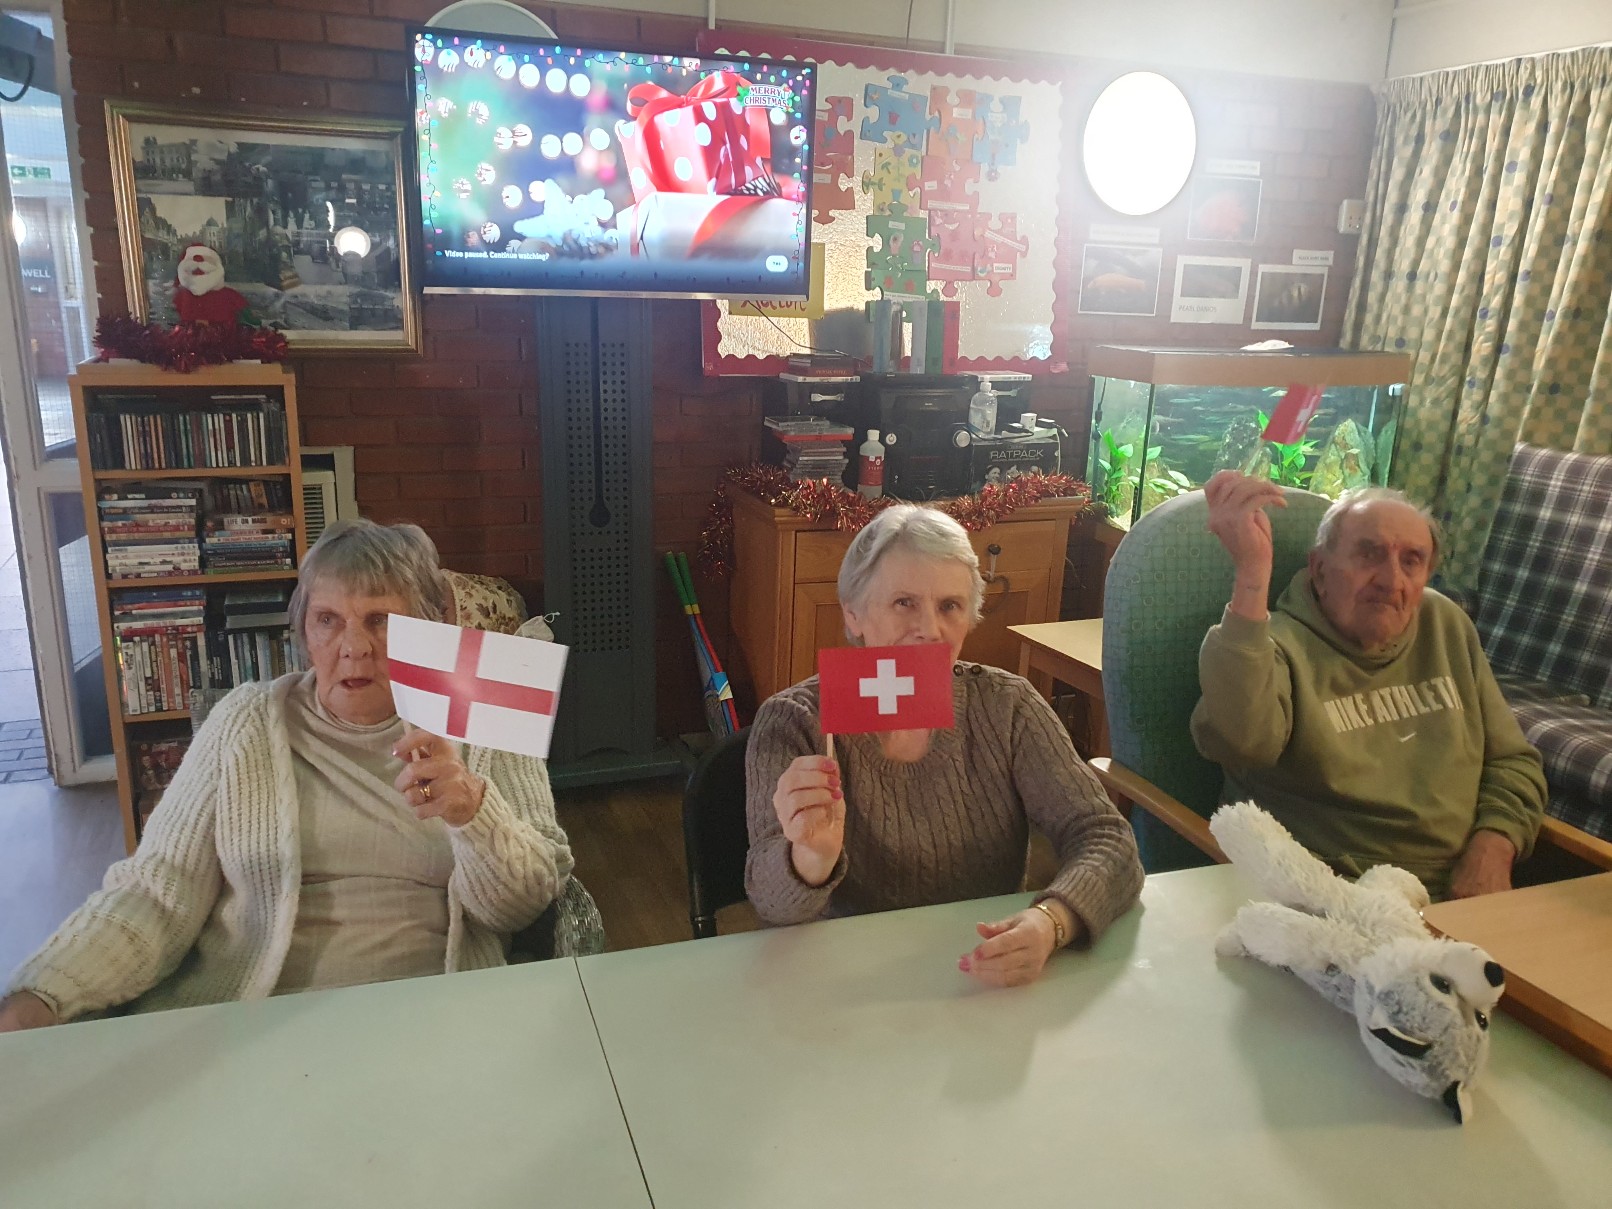 residents with England flags